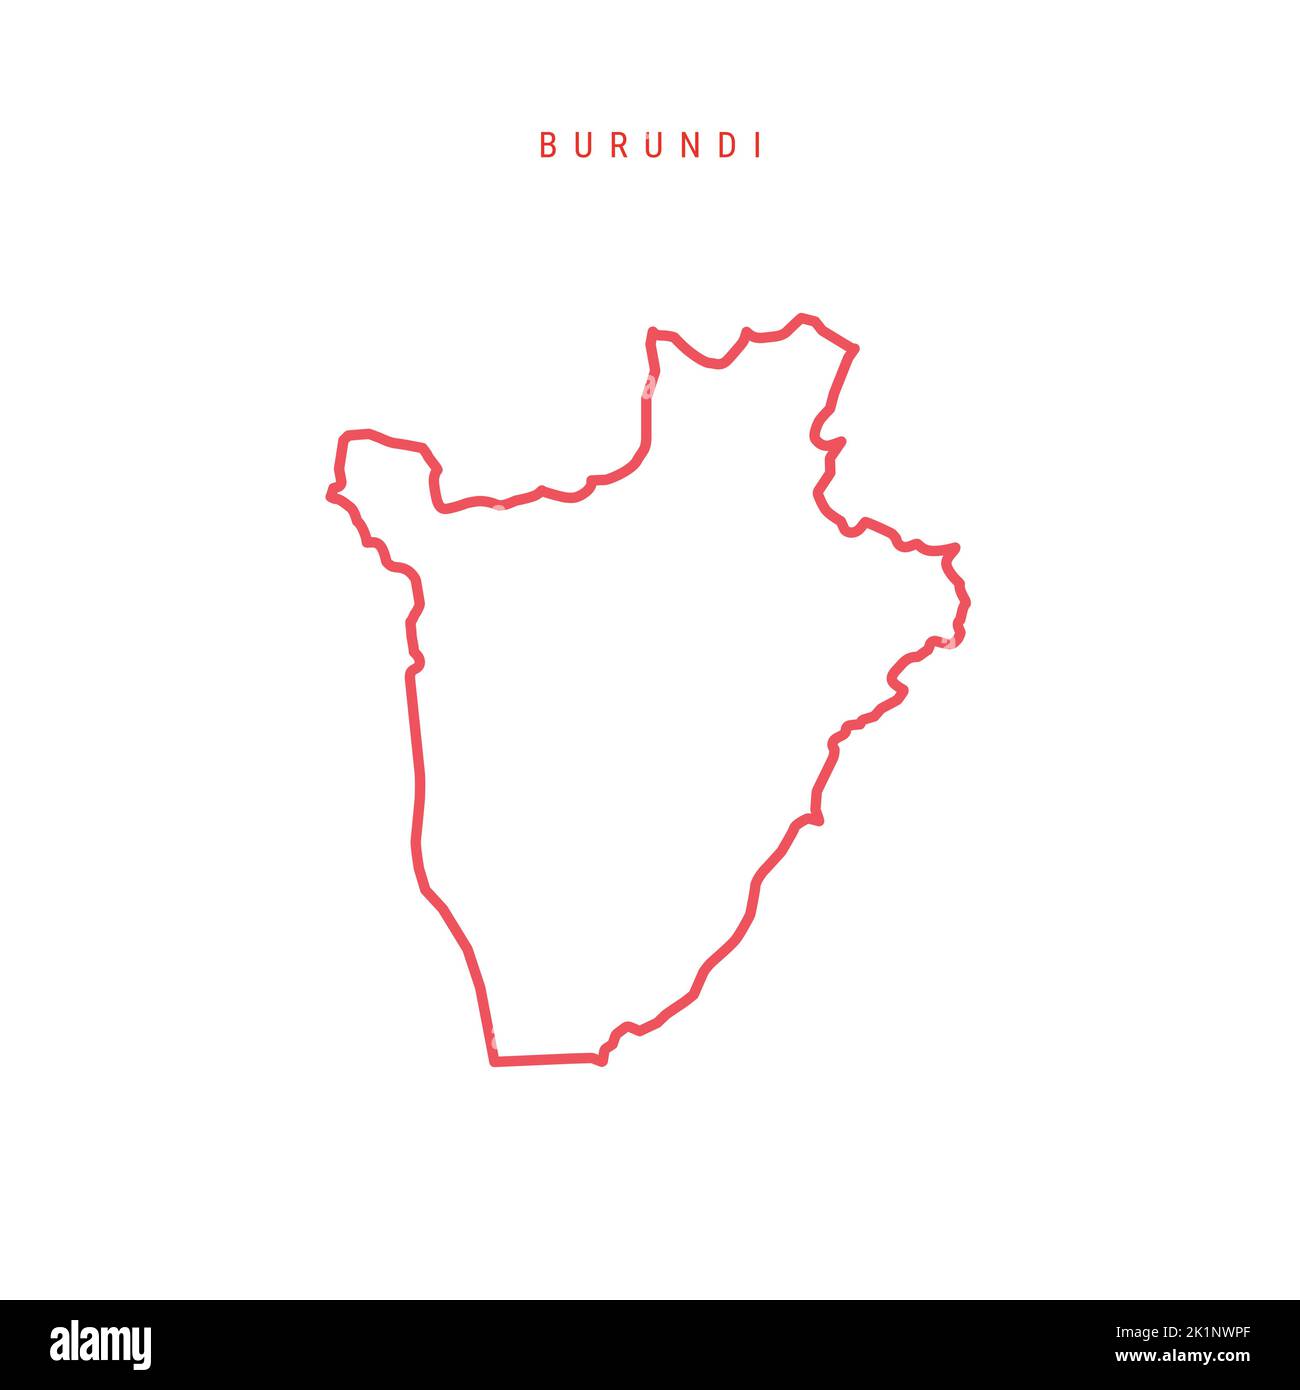 Burundi editable outline map. Burundian red border. Country name. Adjust line weight. Change to any color. Vector illustration. Stock Vector